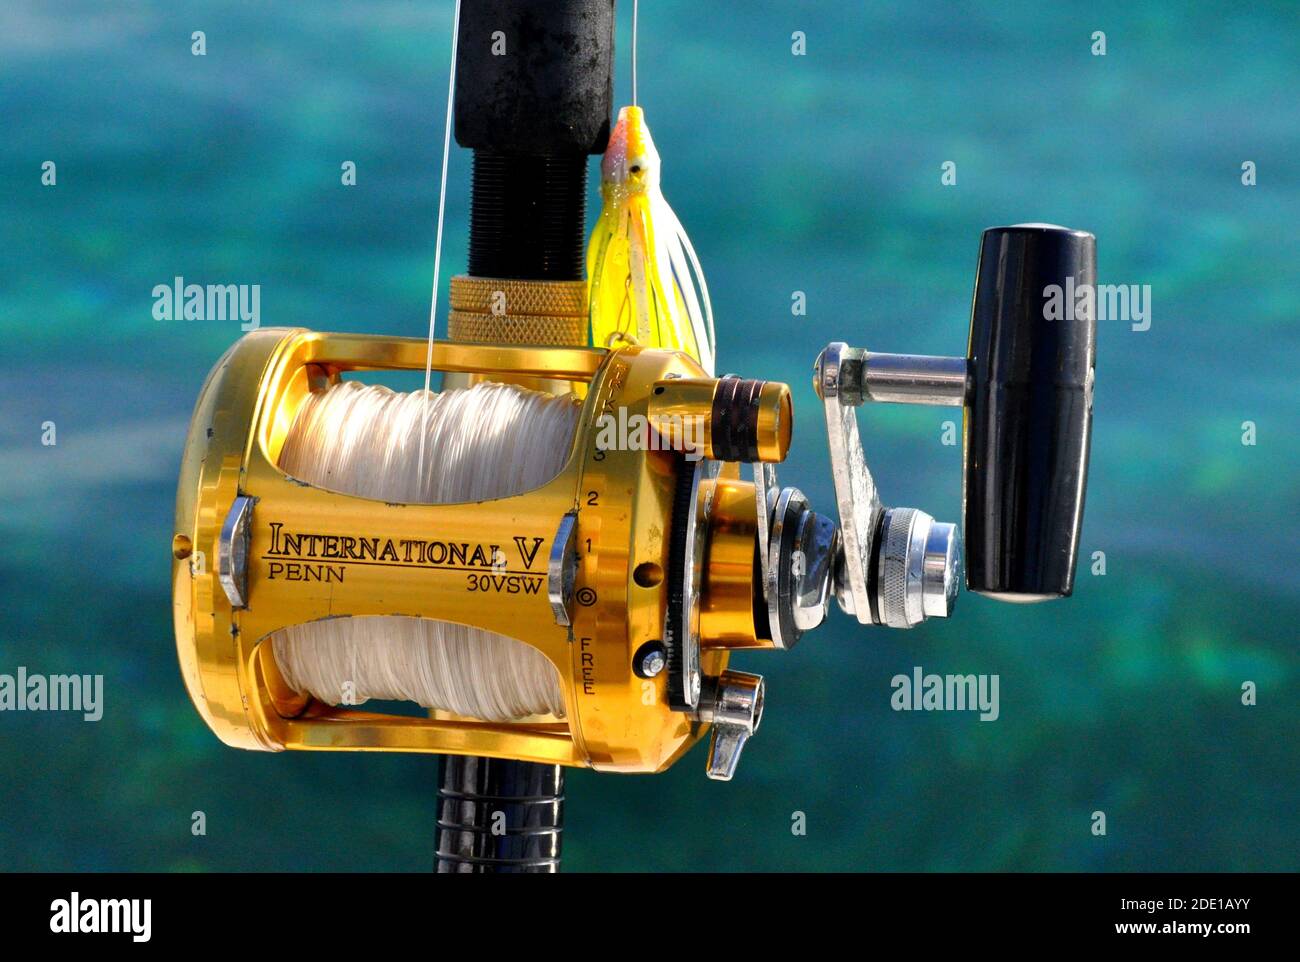 Negril, Jamaica - May 4, 2015 - International V Penn gold color fishing reel for deepsea fishing Stock Photo